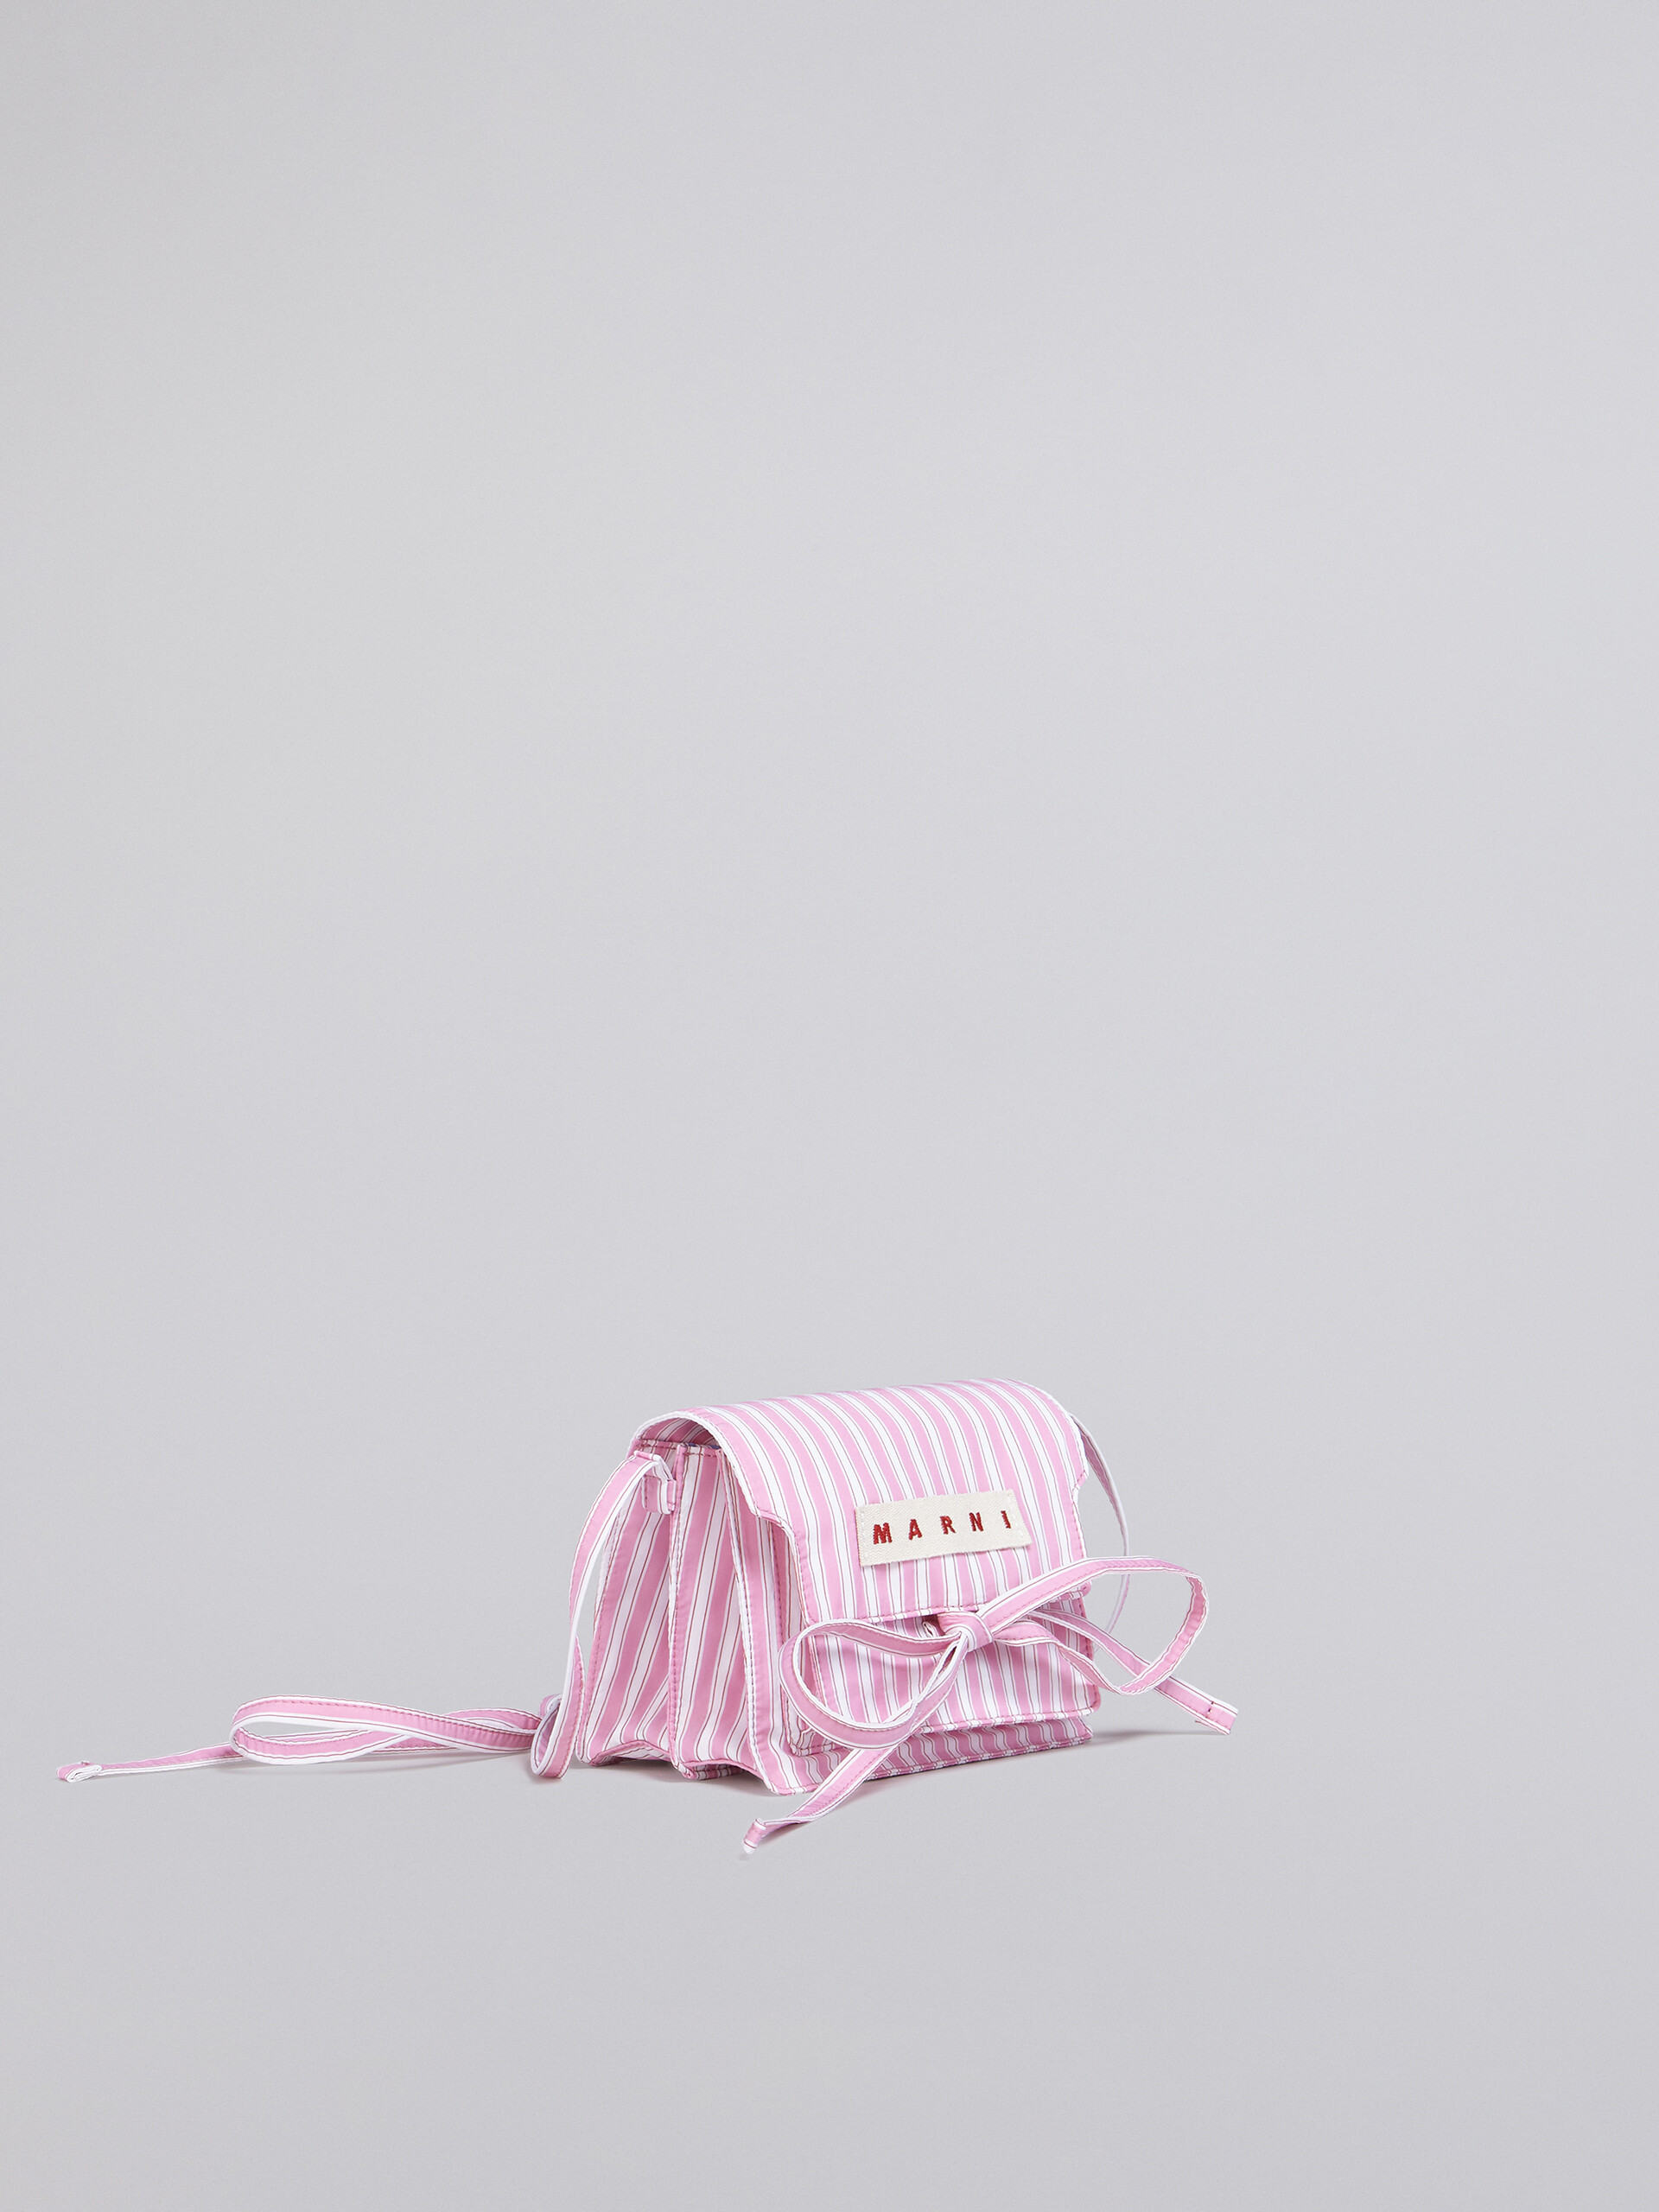 TRUNK SOFT mini bag in pink and white striped poplin - Shoulder Bags - Image 6